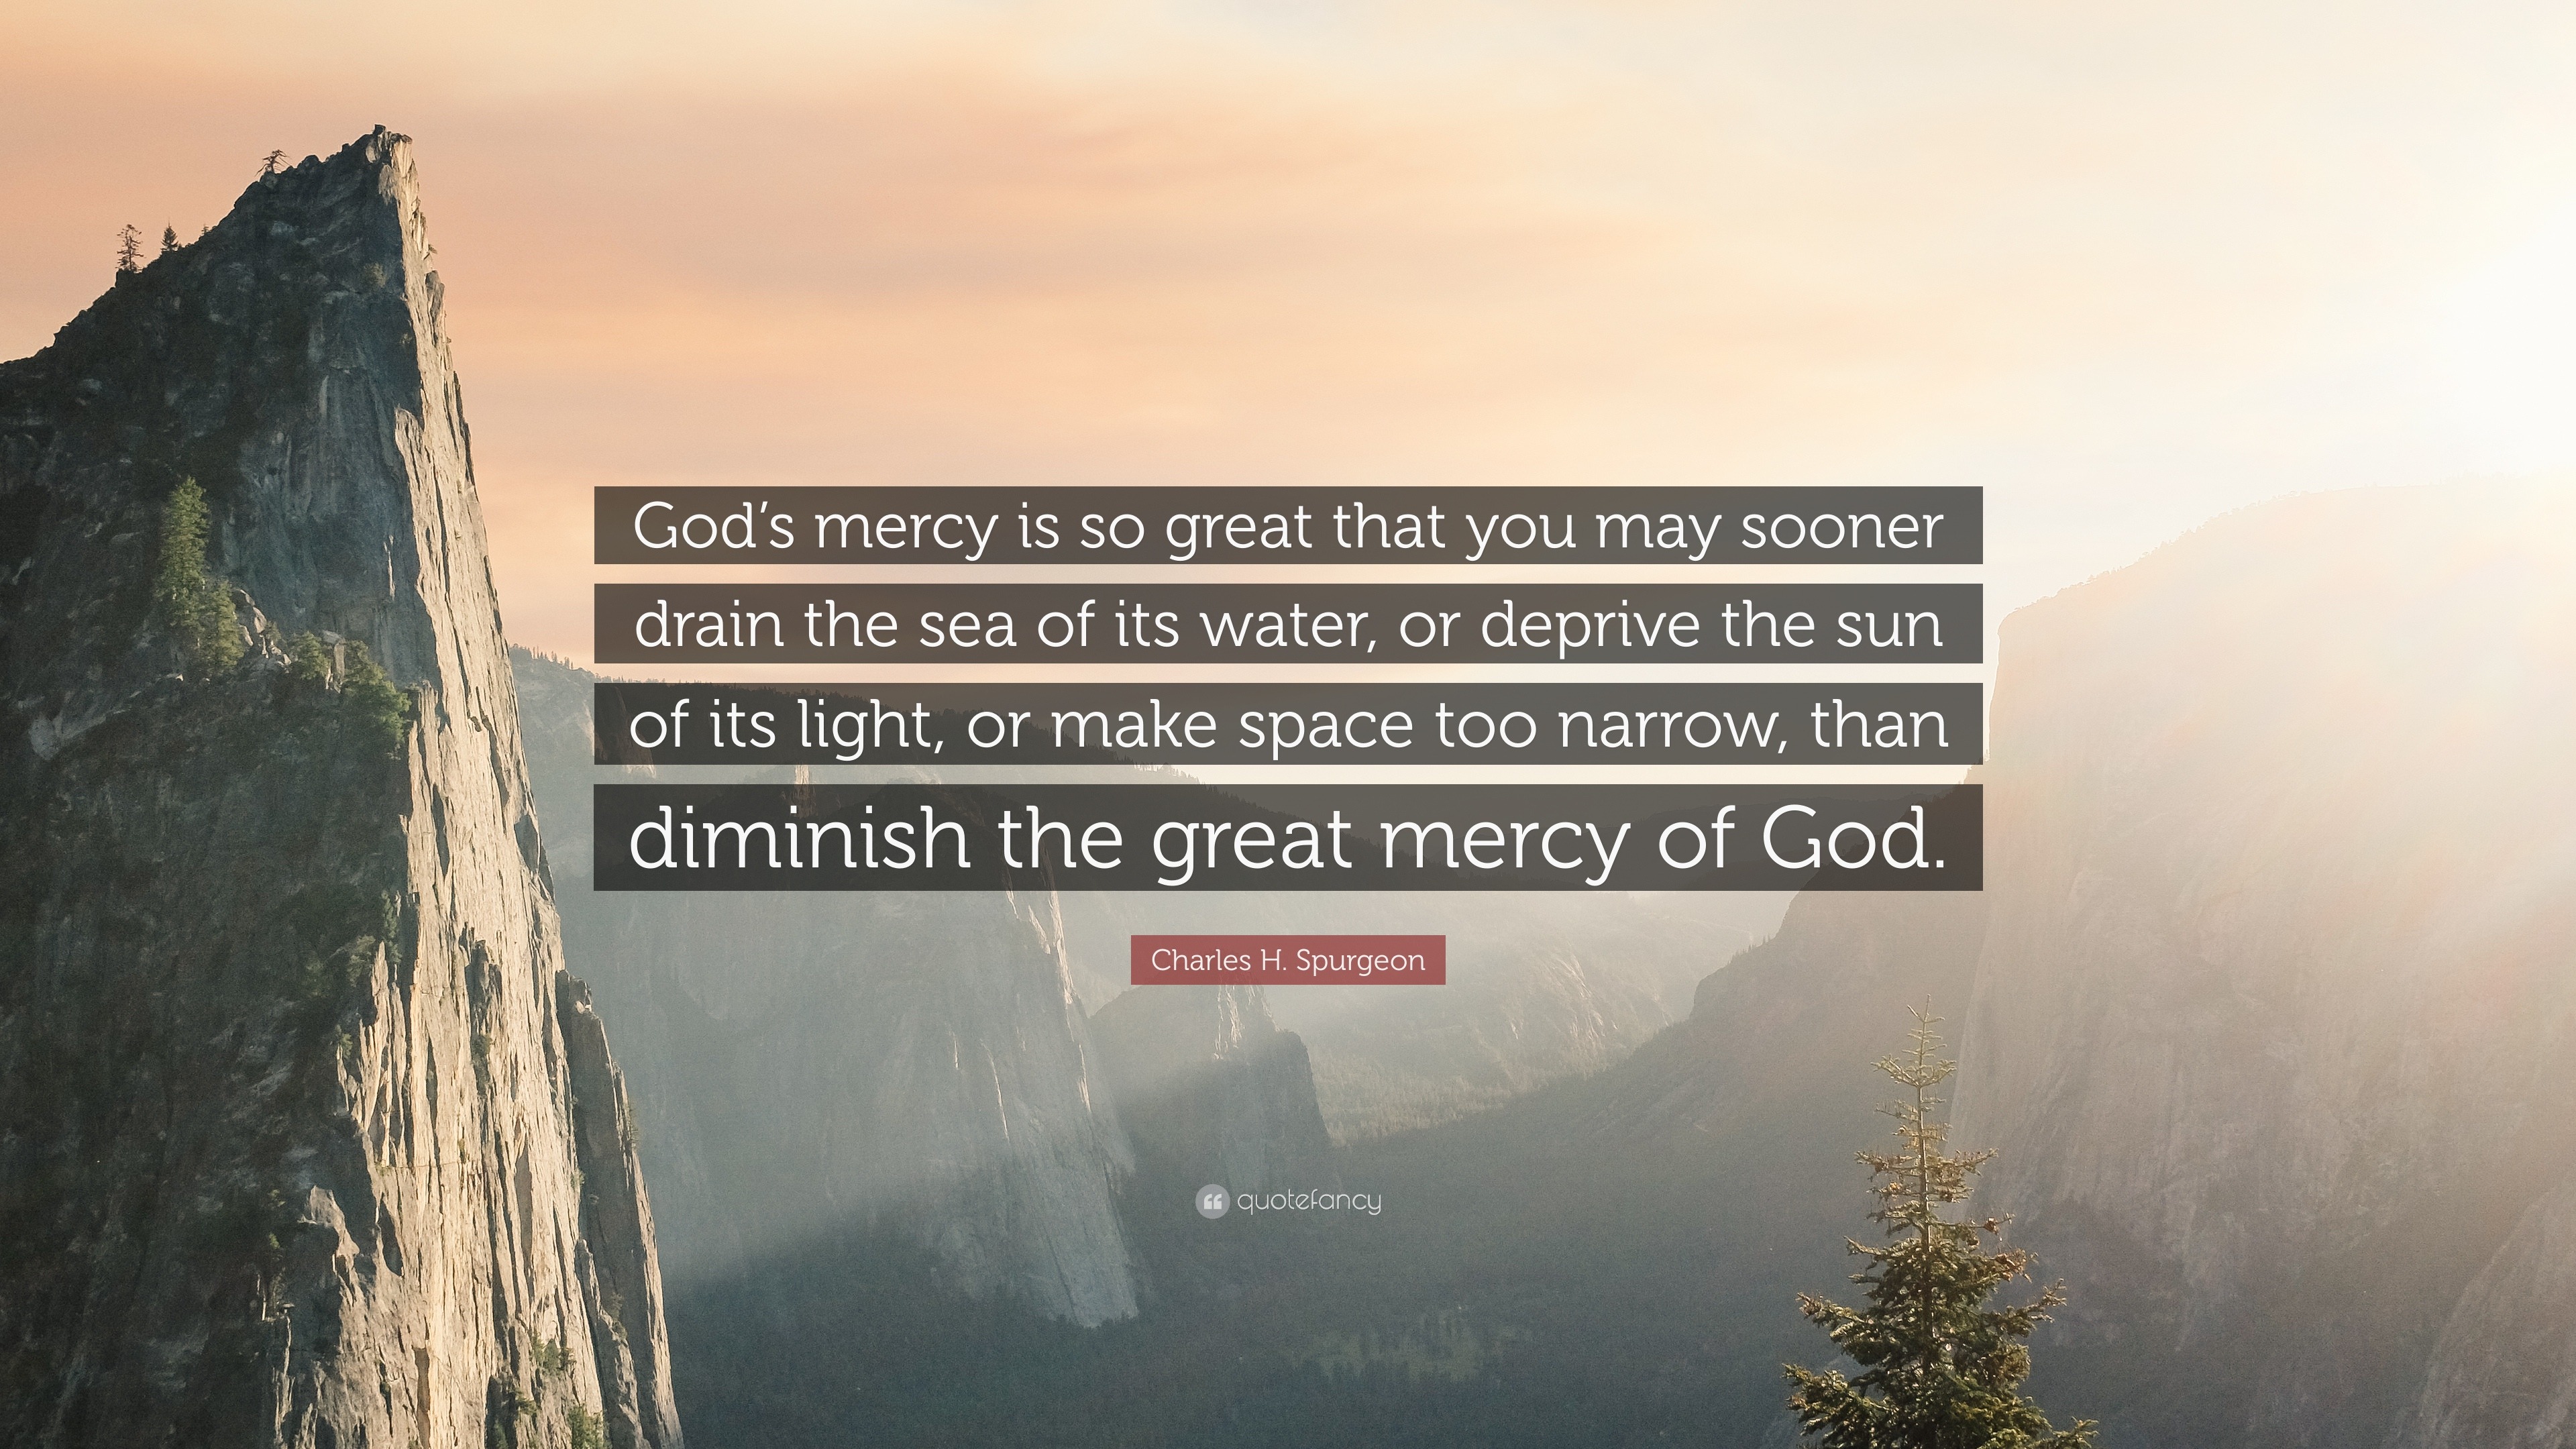 mercy god spurgeon quote charles quotes sea water its space sooner drain than deprive sun faith persistence christian diminish narrow